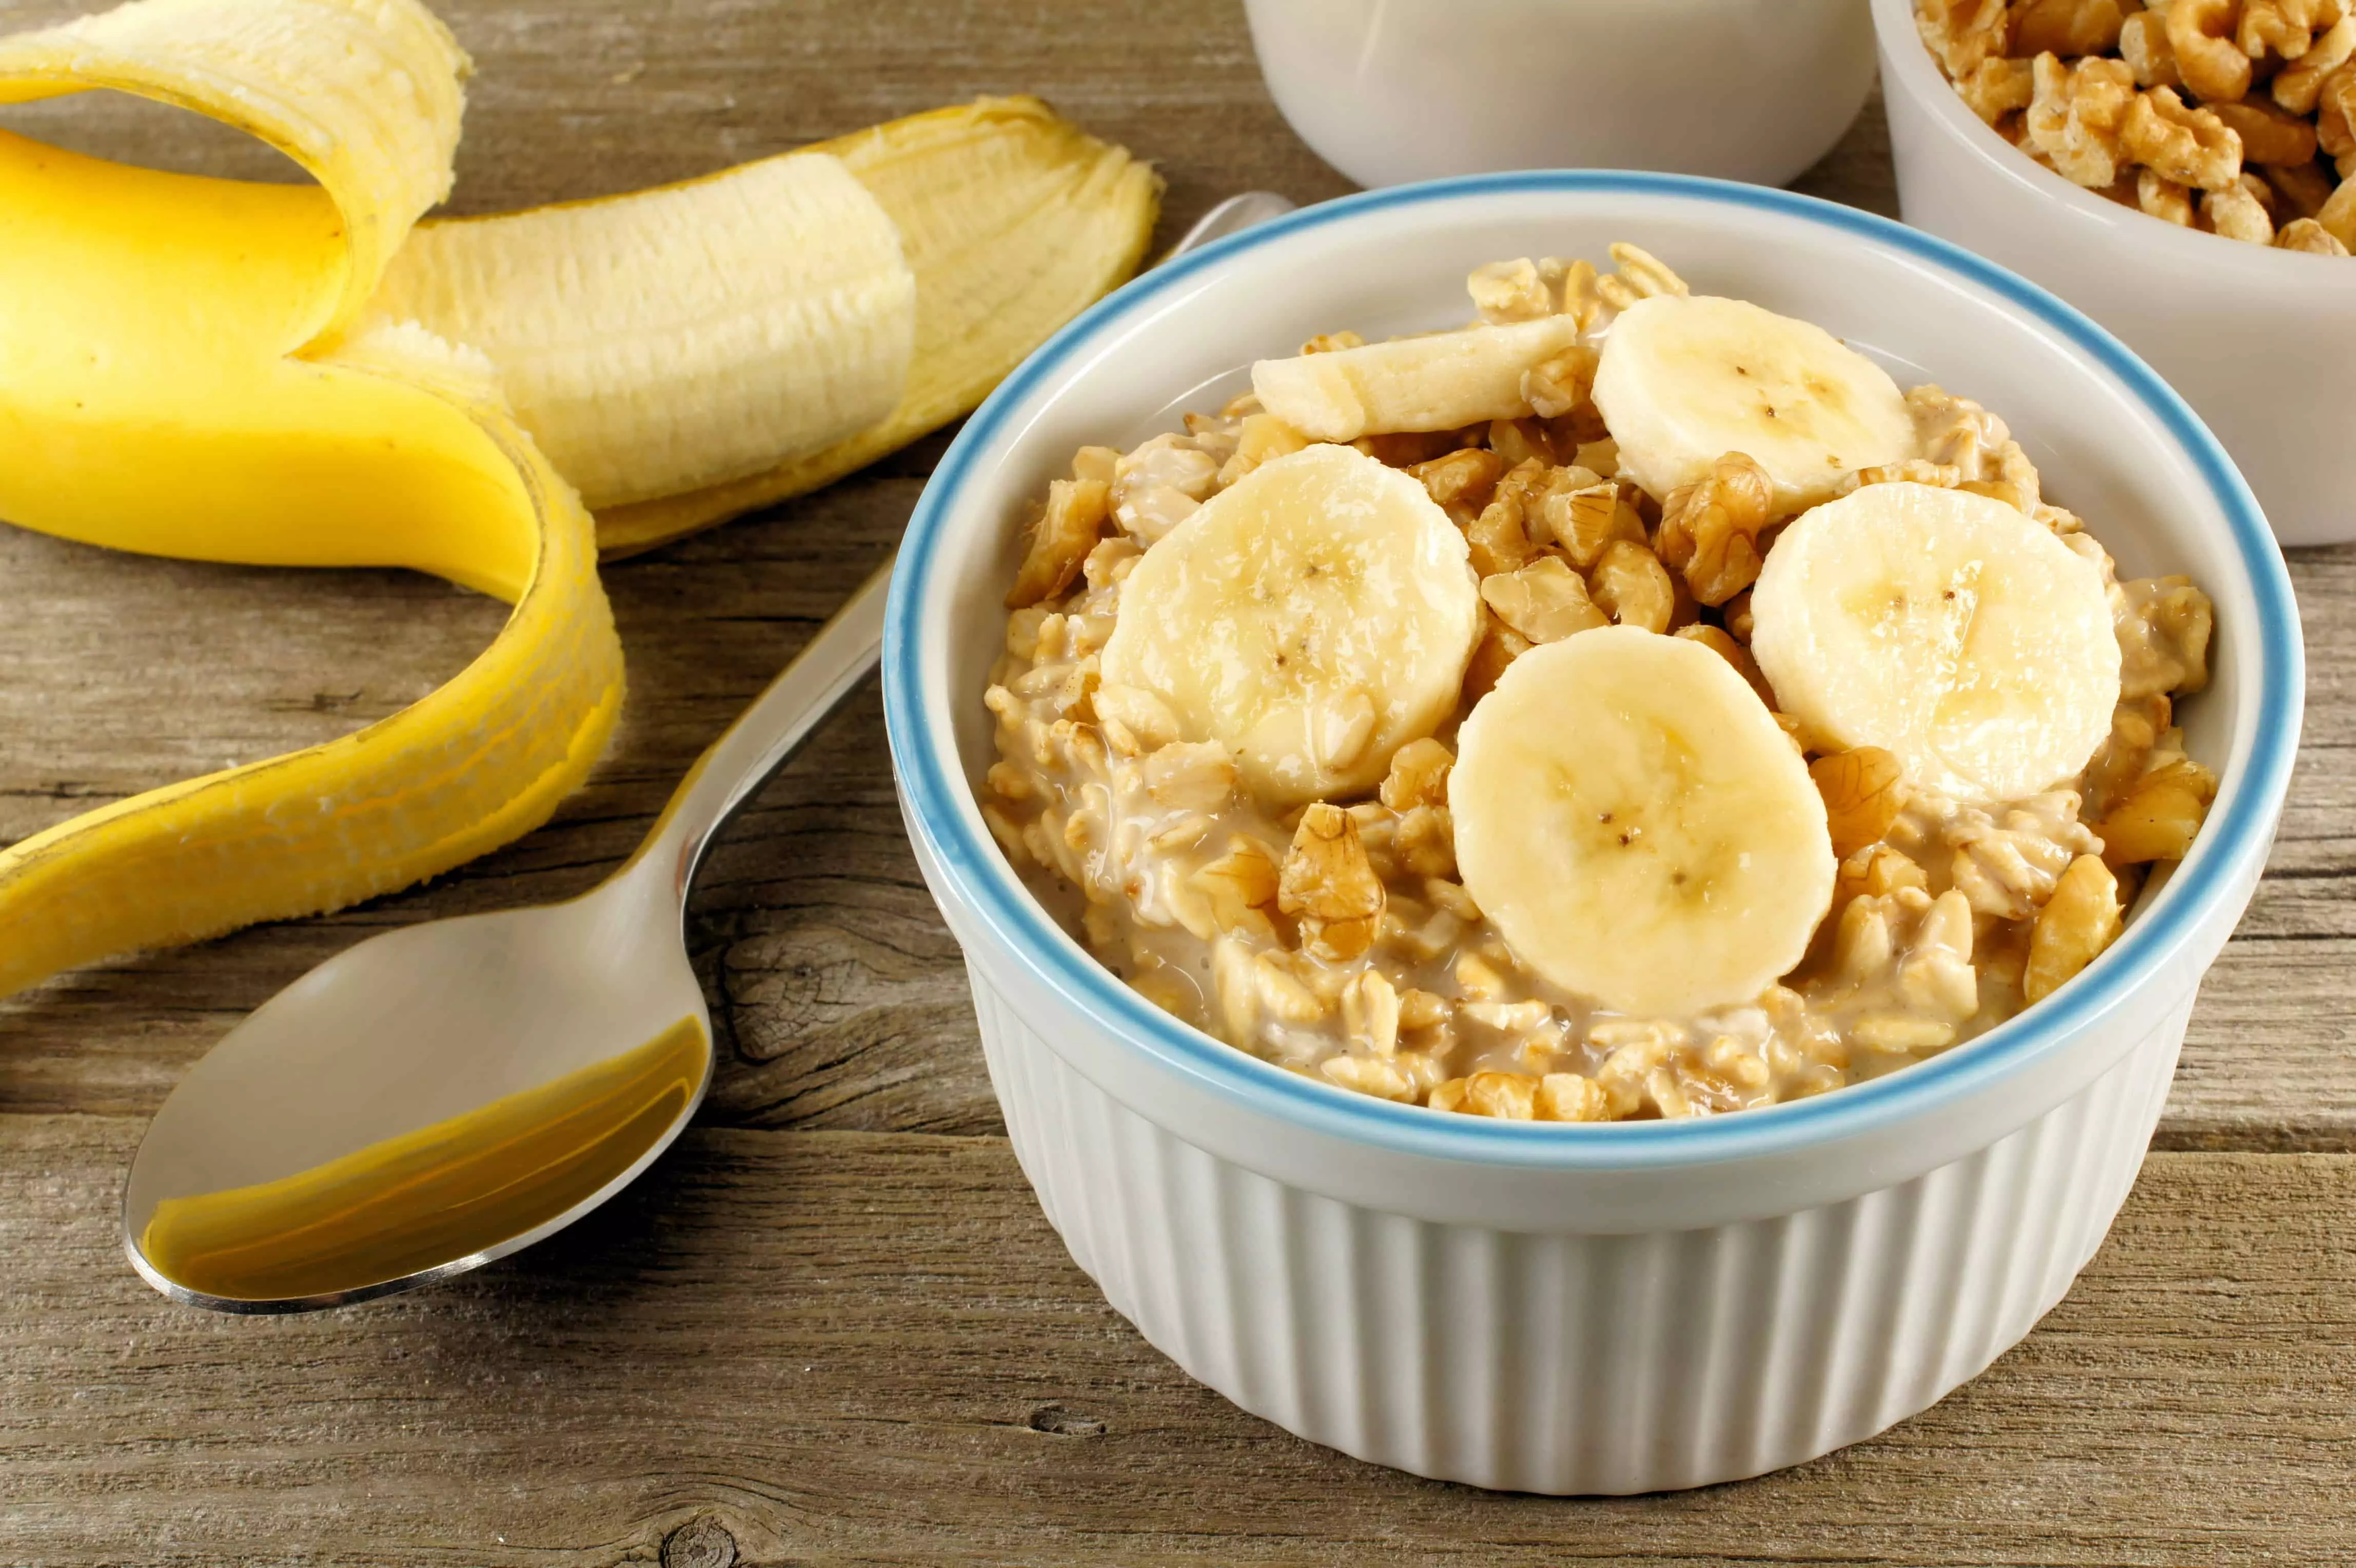 10 Health Benefits of Bananas That Will Keep You In Top Shape